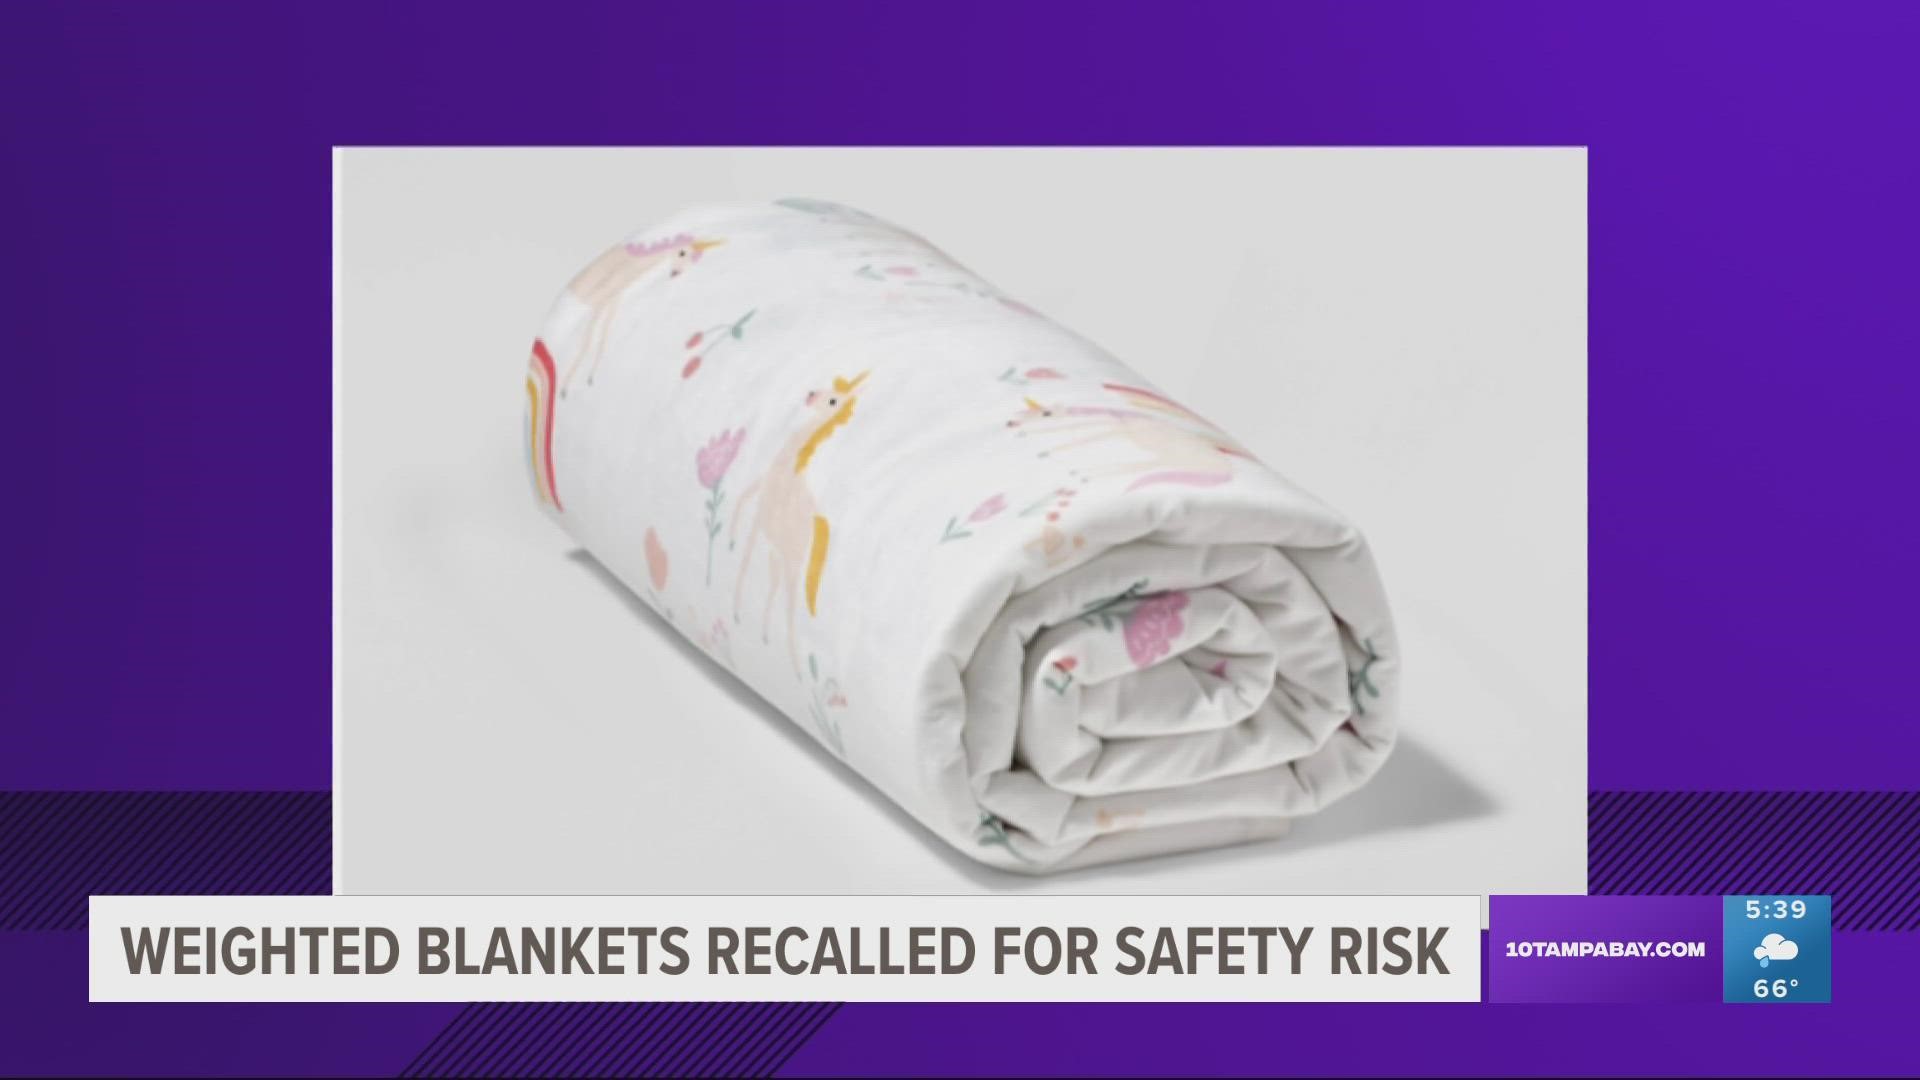 The blankets have a washable cover, secured using a zipper, and young children can become trapped inside when unzipping the blanket and crawling in.